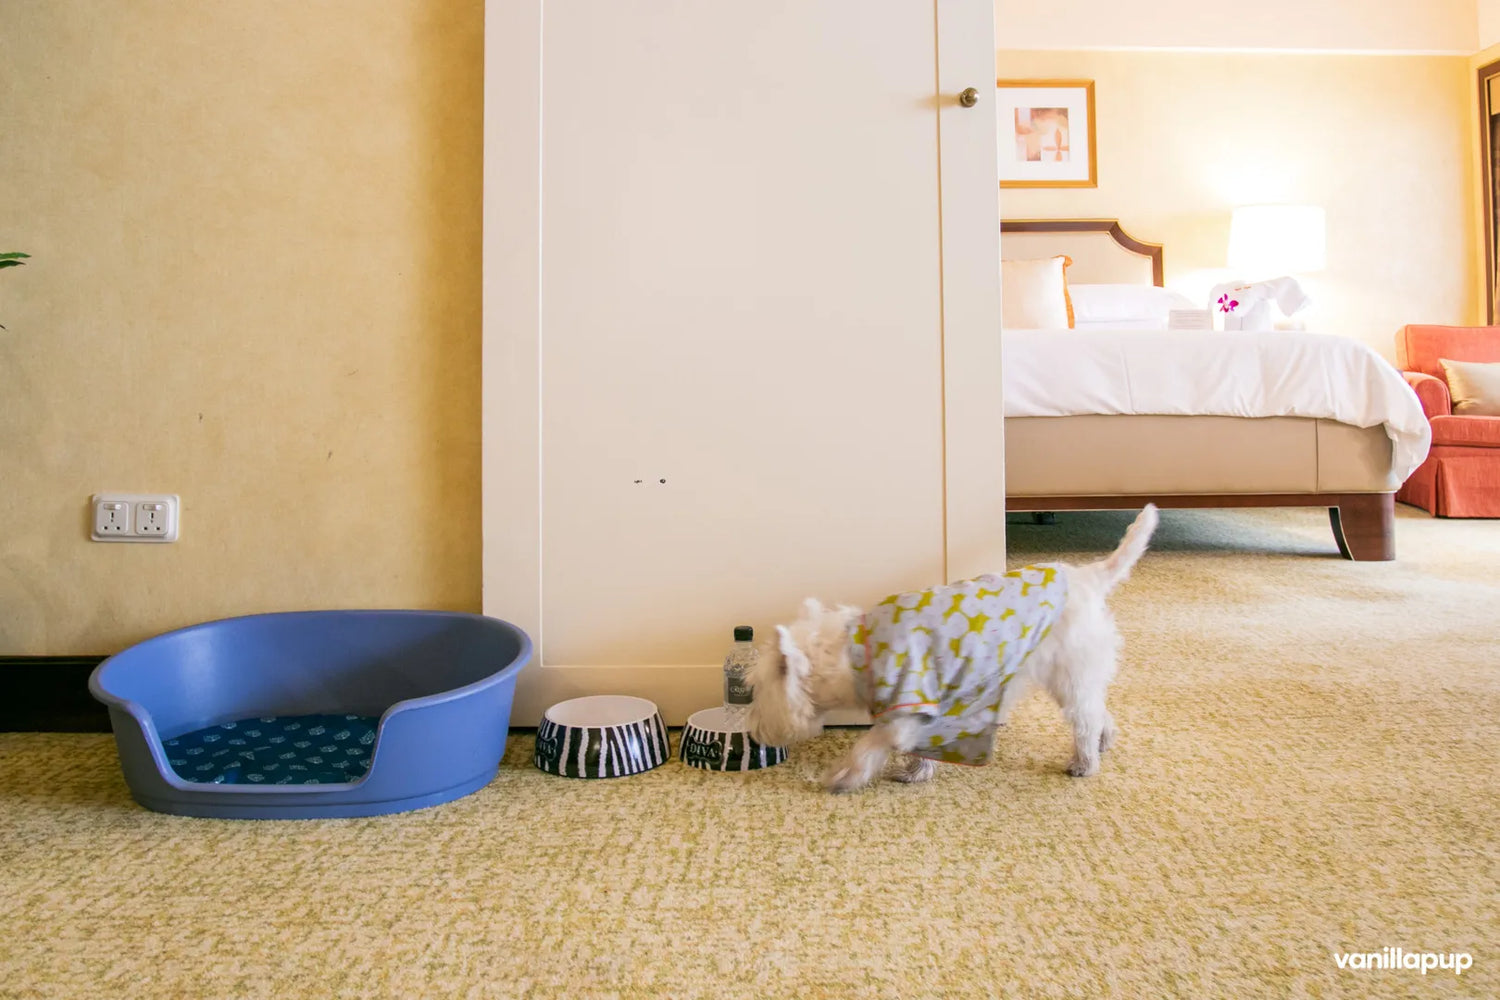 20 Dog-friendly Hotels, Serviced Apartments, and Chalets in Singapore